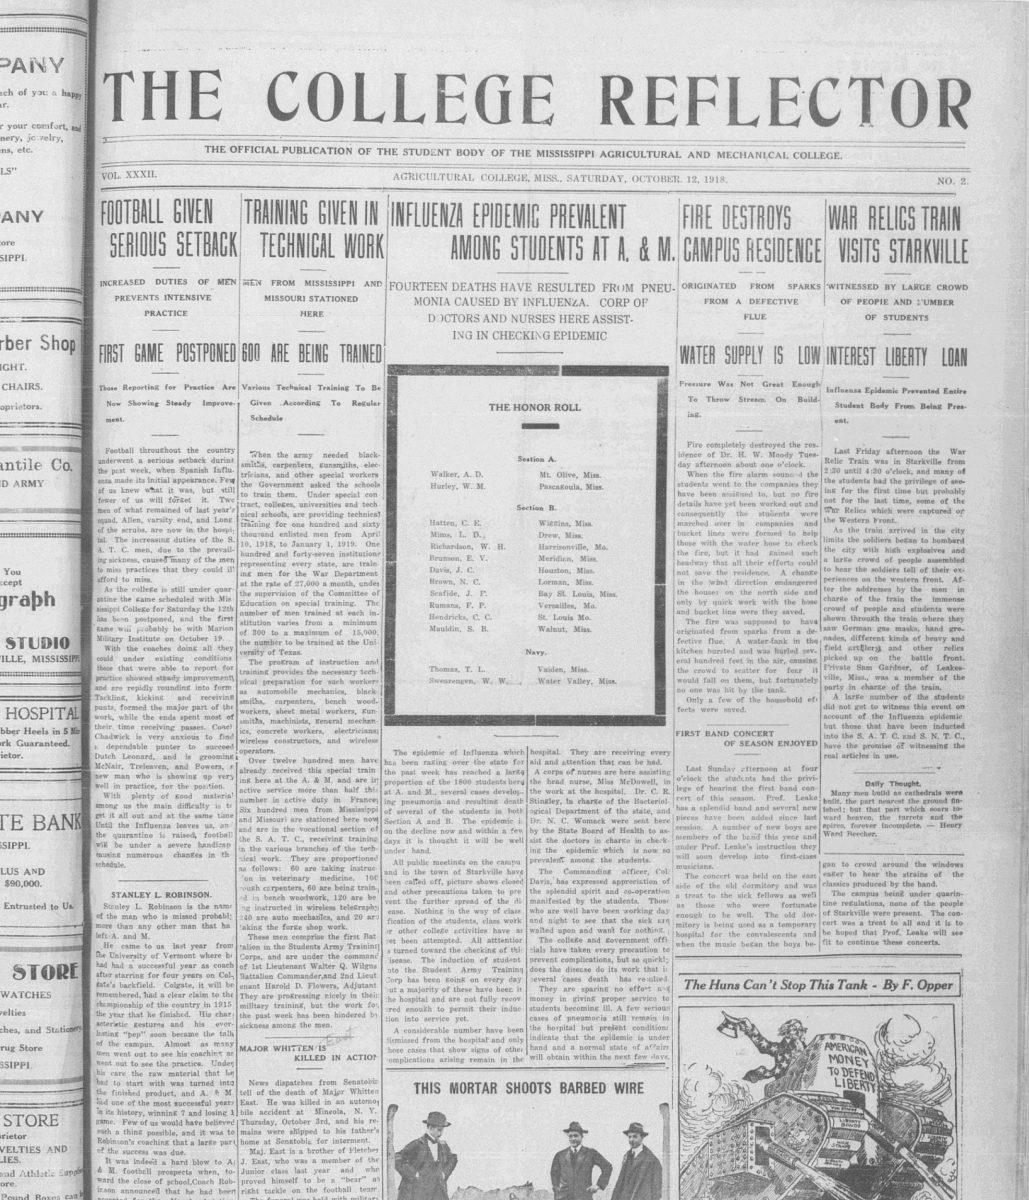 An archived news article describes the Influenza Epidemic of 1918. In a similar fashion, MSU Libraries hopes to recreate this resource for the present day with the digital COVID-19 archive.